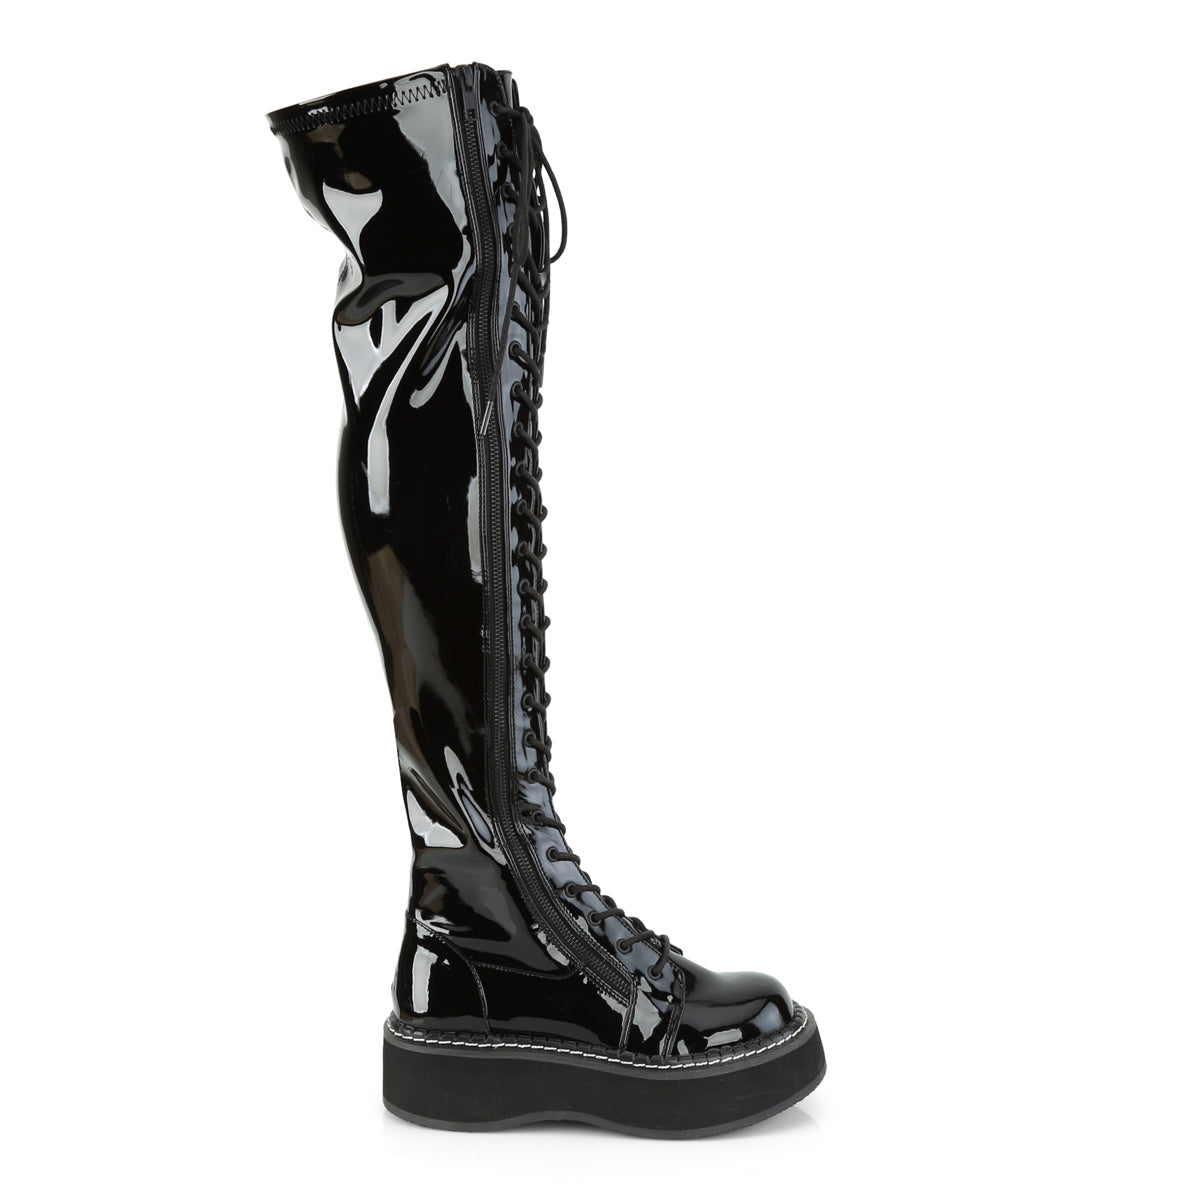 Demonia EMILY-375 | Black  Patent Leather Over-the-Knee Boots